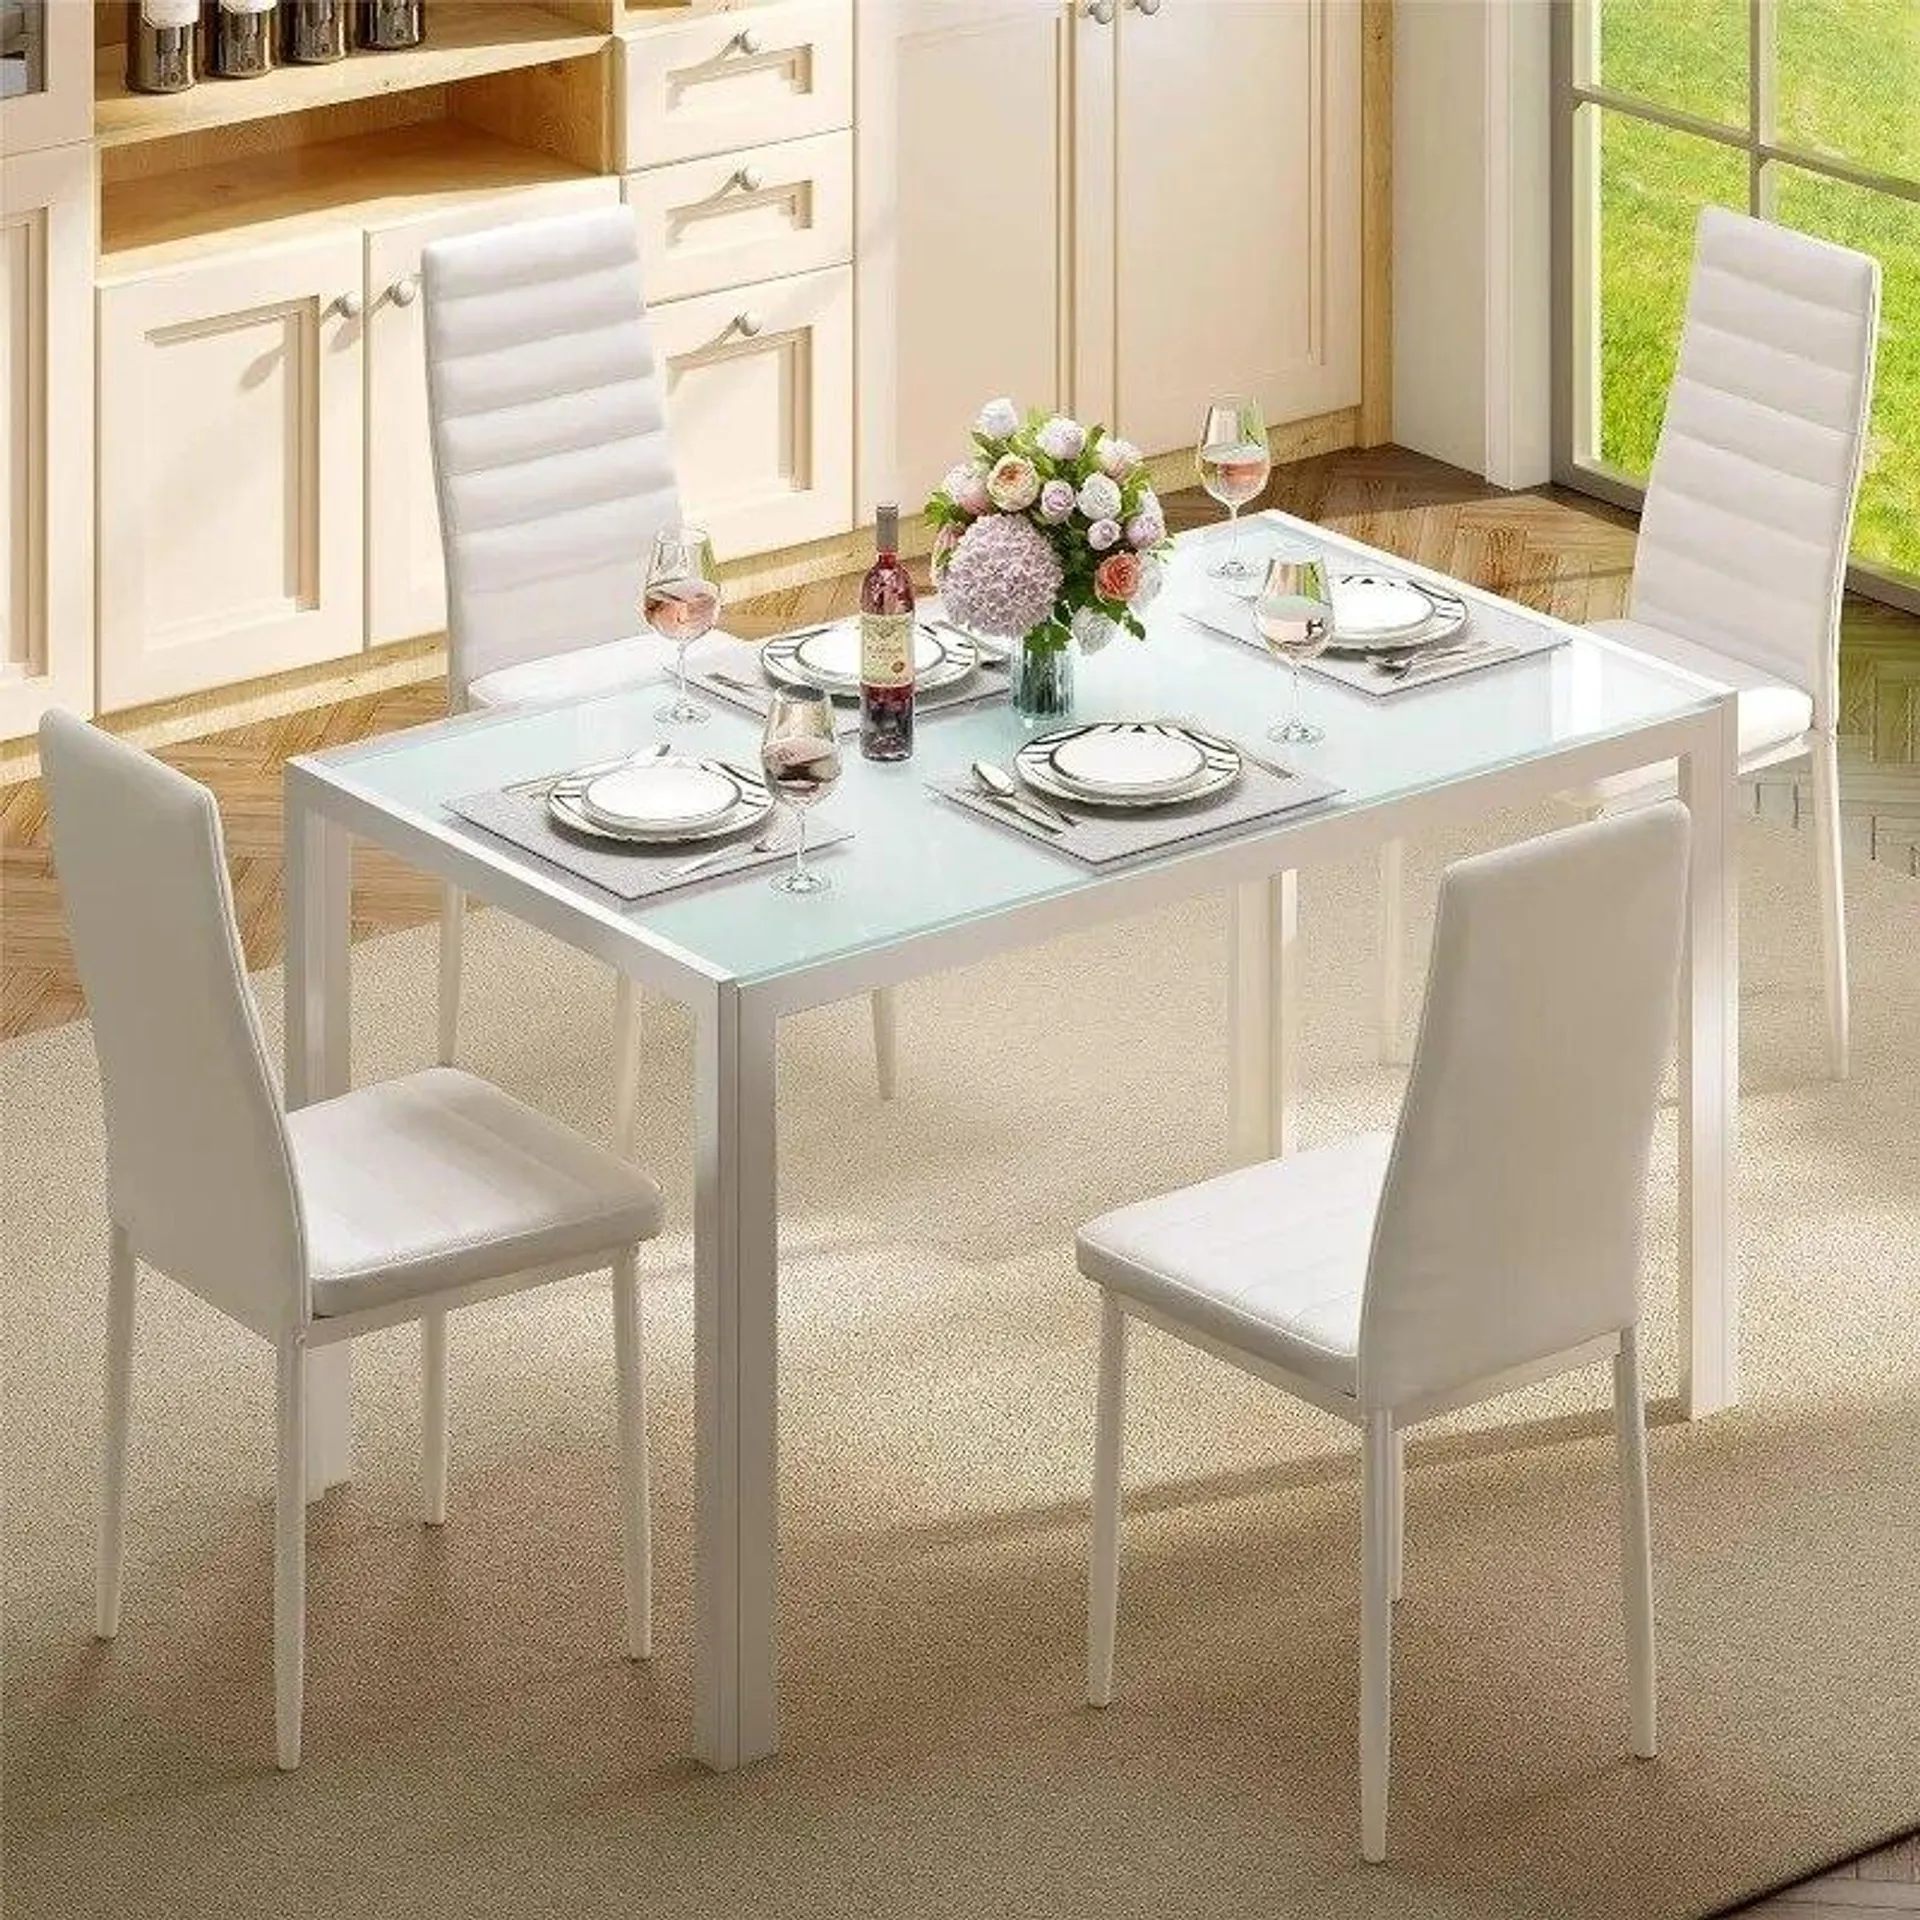 Gizoon 5 Piece Glass Dining Table Set, Kitchen Table and Chairs for 4, PU Leather Modern Dining Room Sets for Home, Kitchen